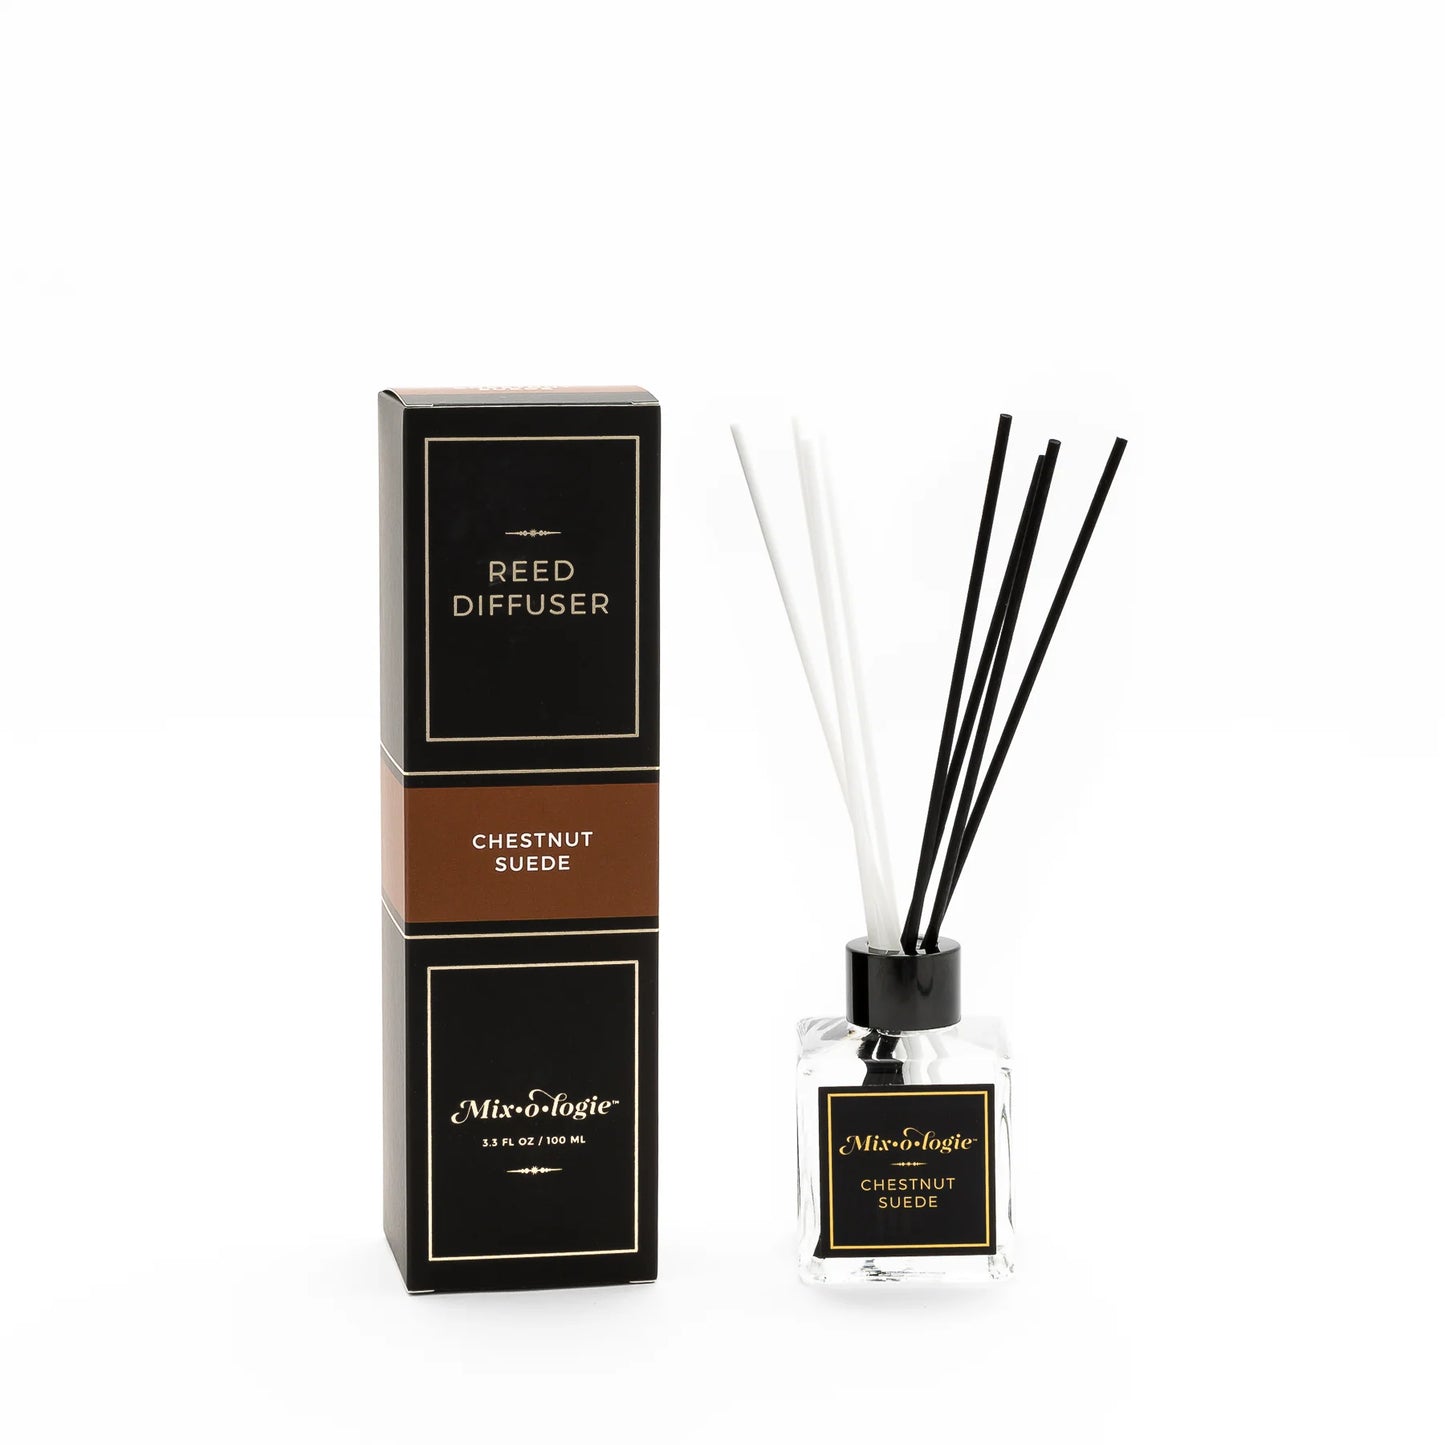 Chestnut Suede Reed Diffuser